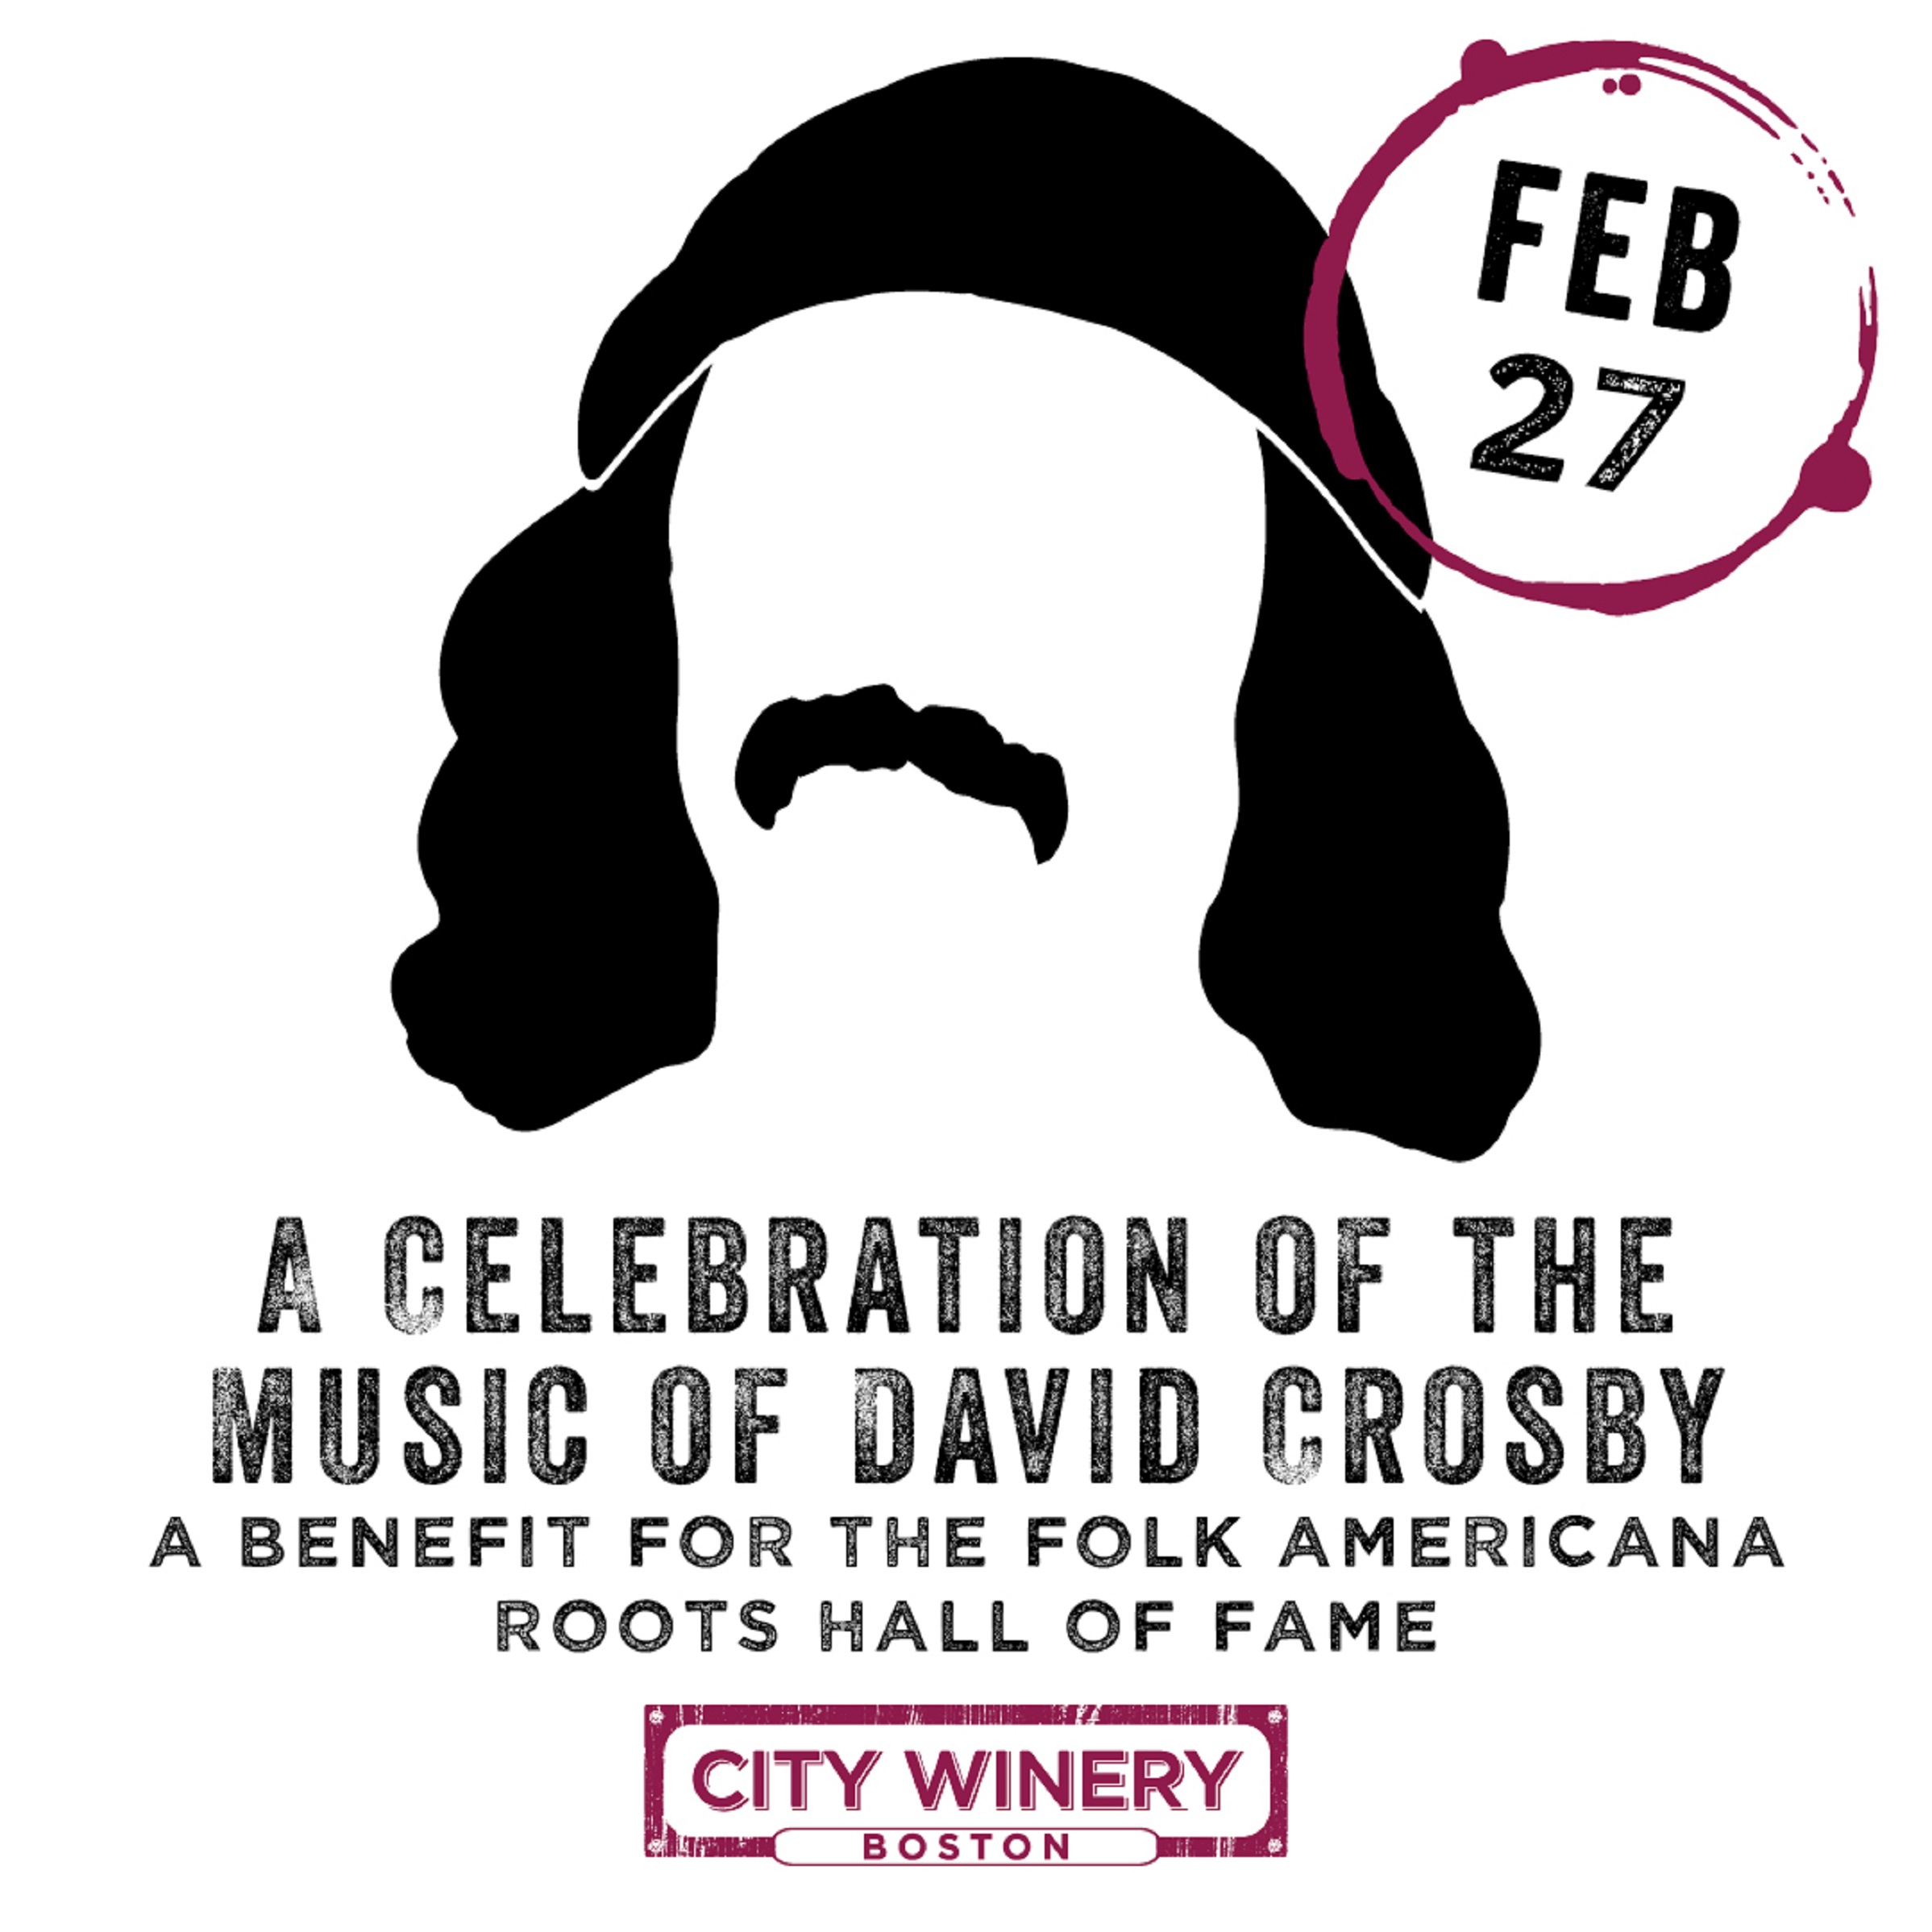 A Celebration of the Music of David Crosby Adds More New England Musicians to Line-up at City Winery Boston Feb 27